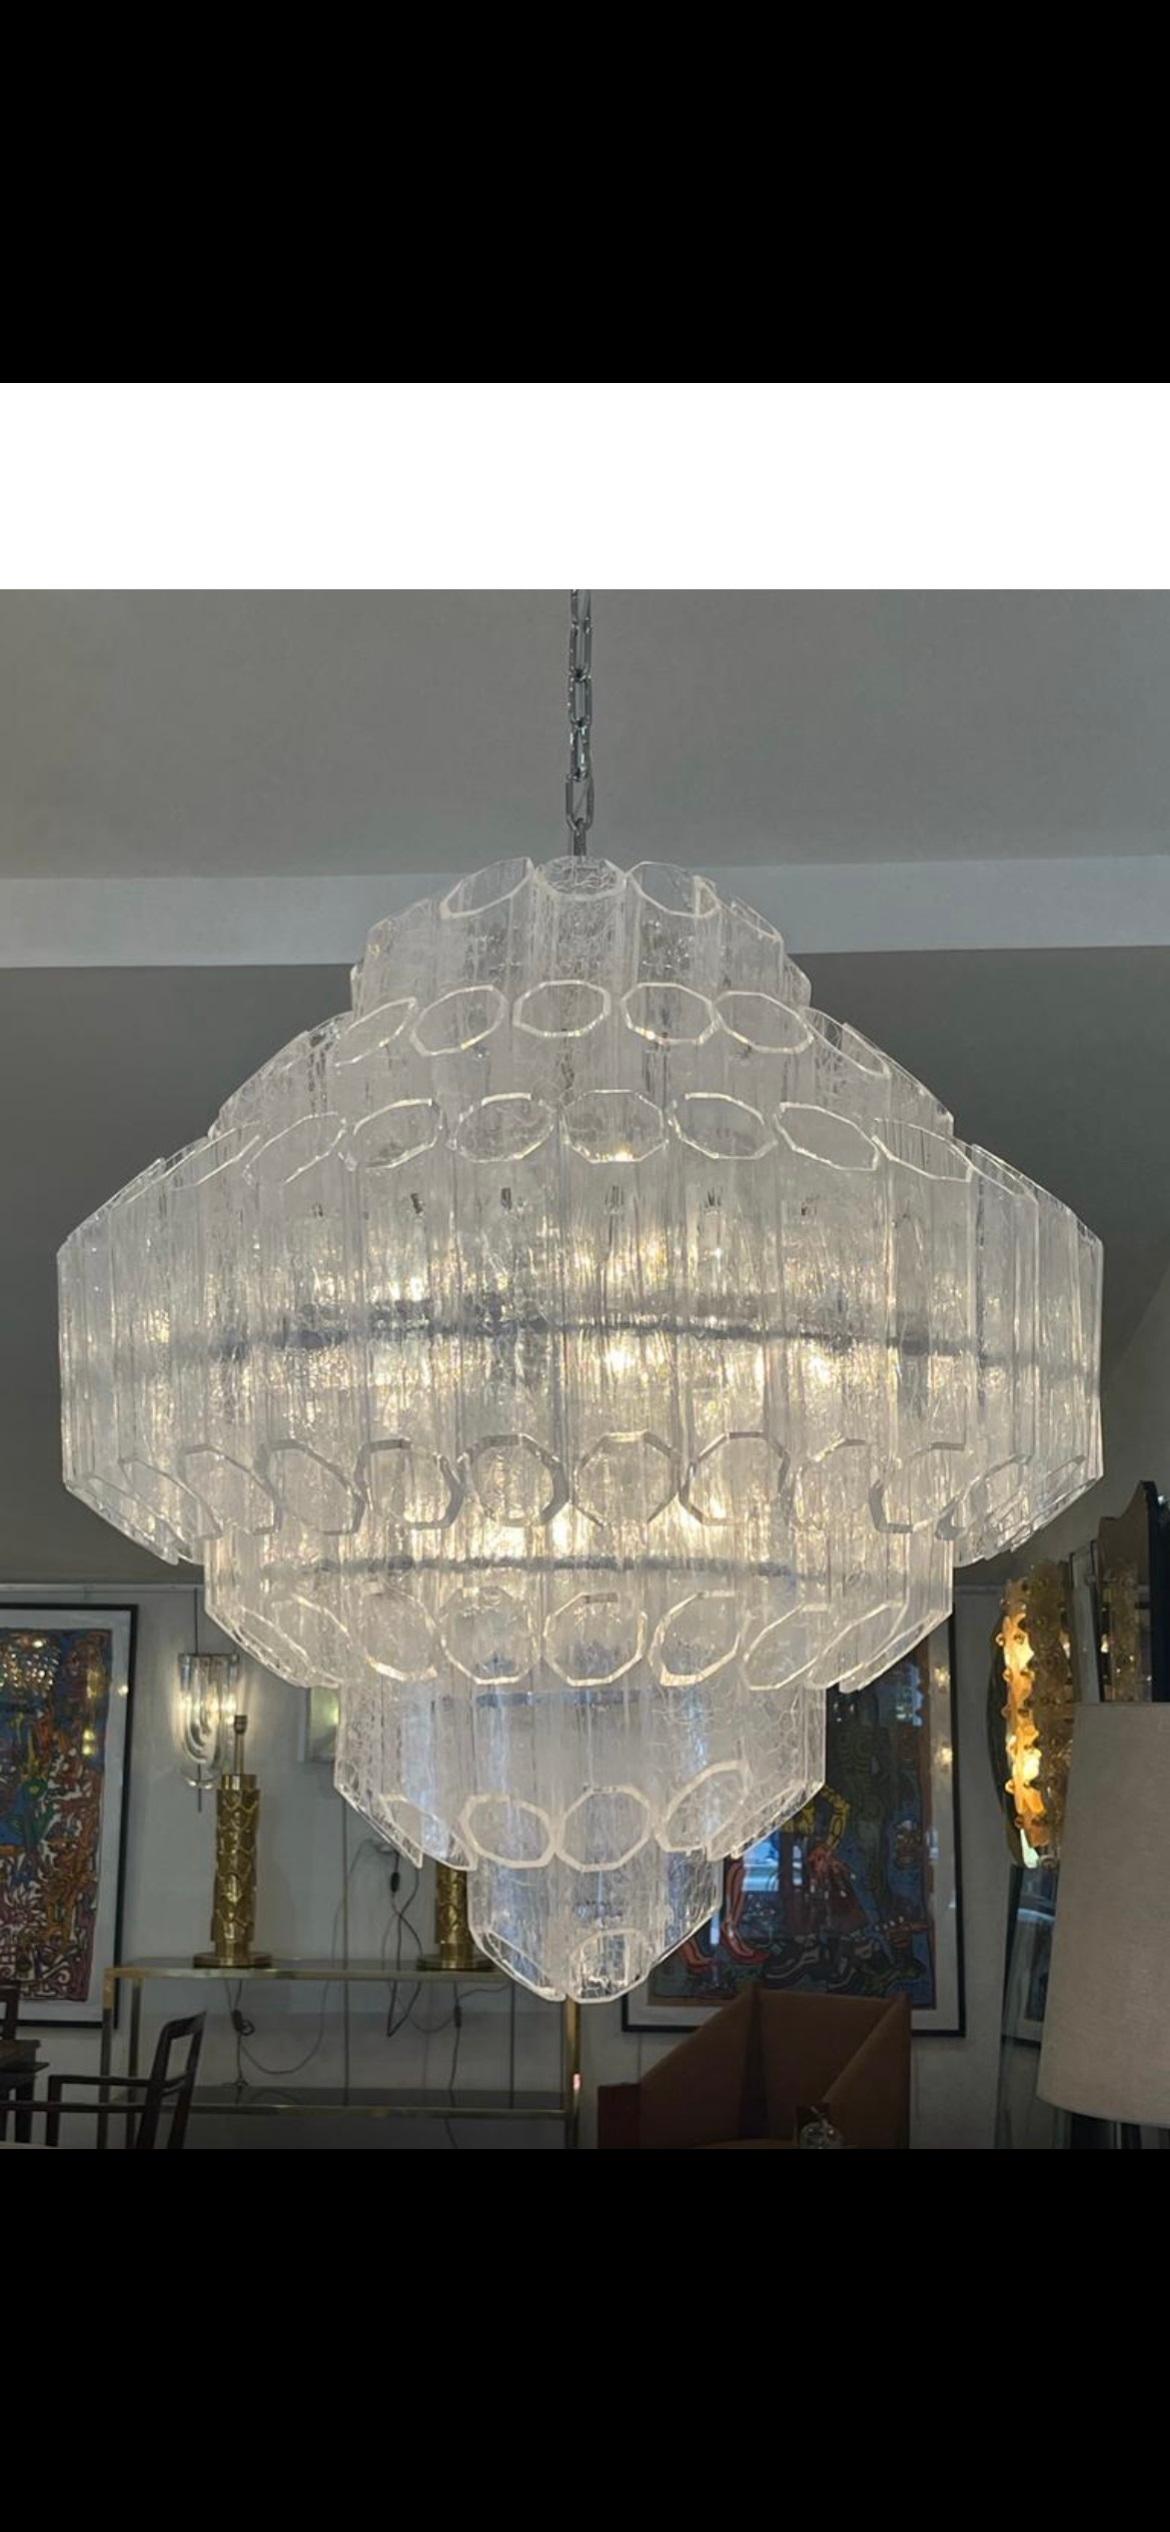 Vintage Venini murano glass chandelier with translucid pendants.
Dimension glass only : Height 90 x diameter 80 cm.